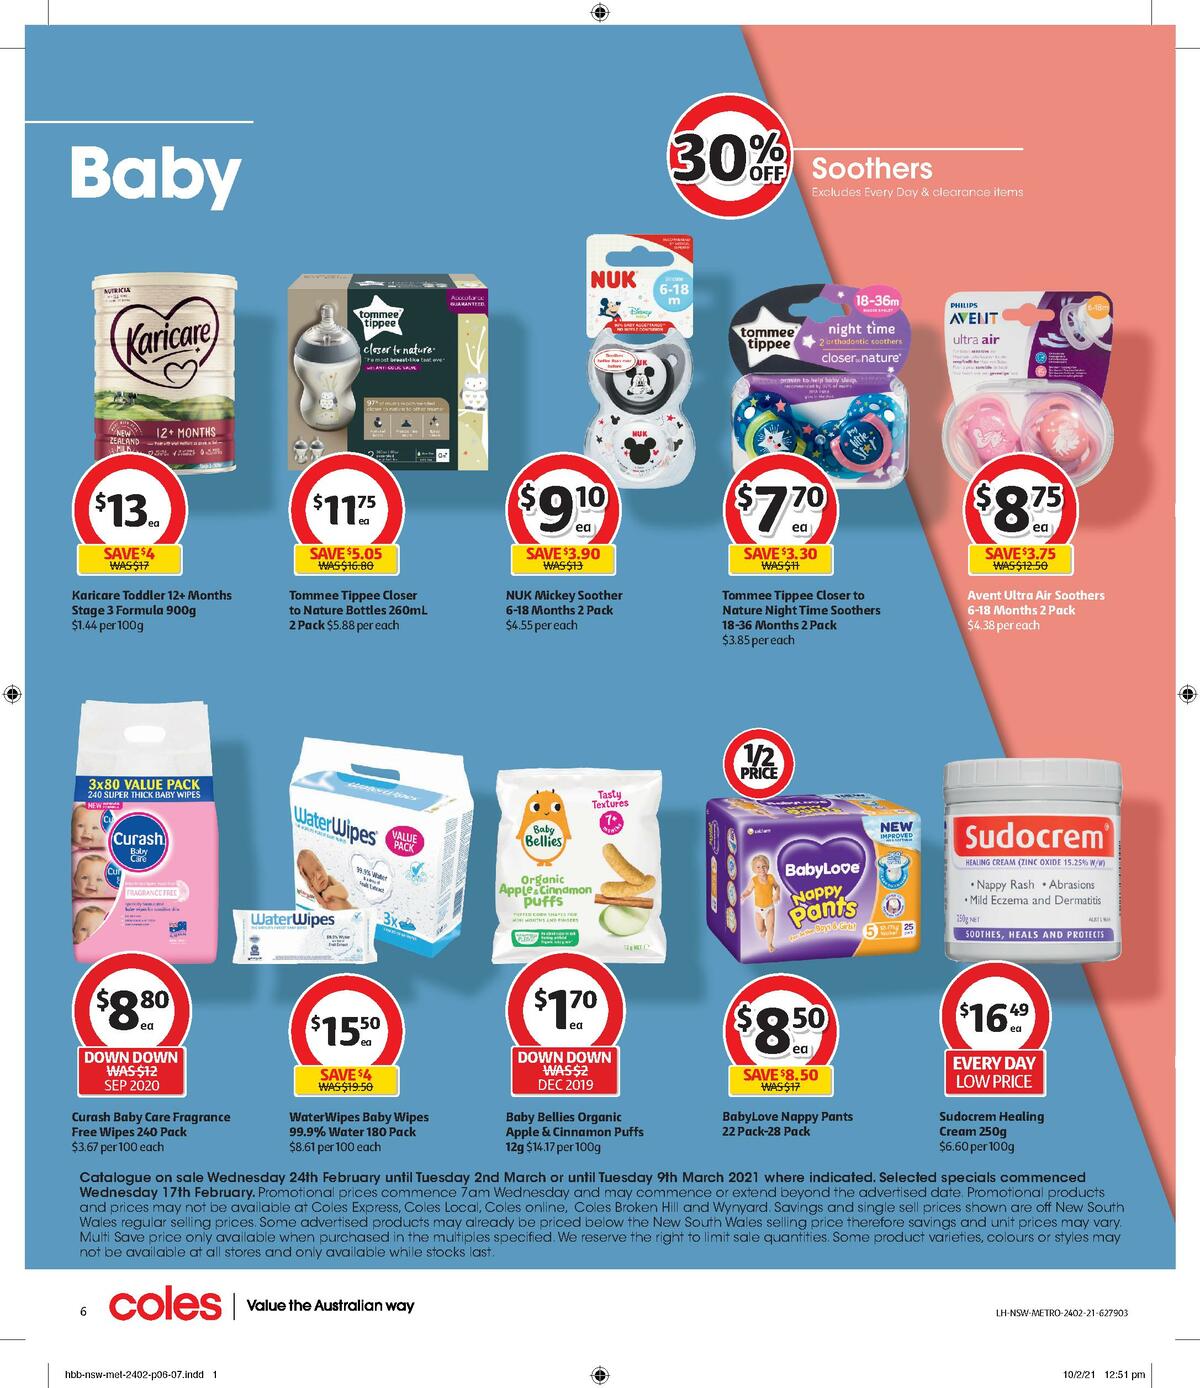 Coles Health & Beauty Catalogues from 24 February